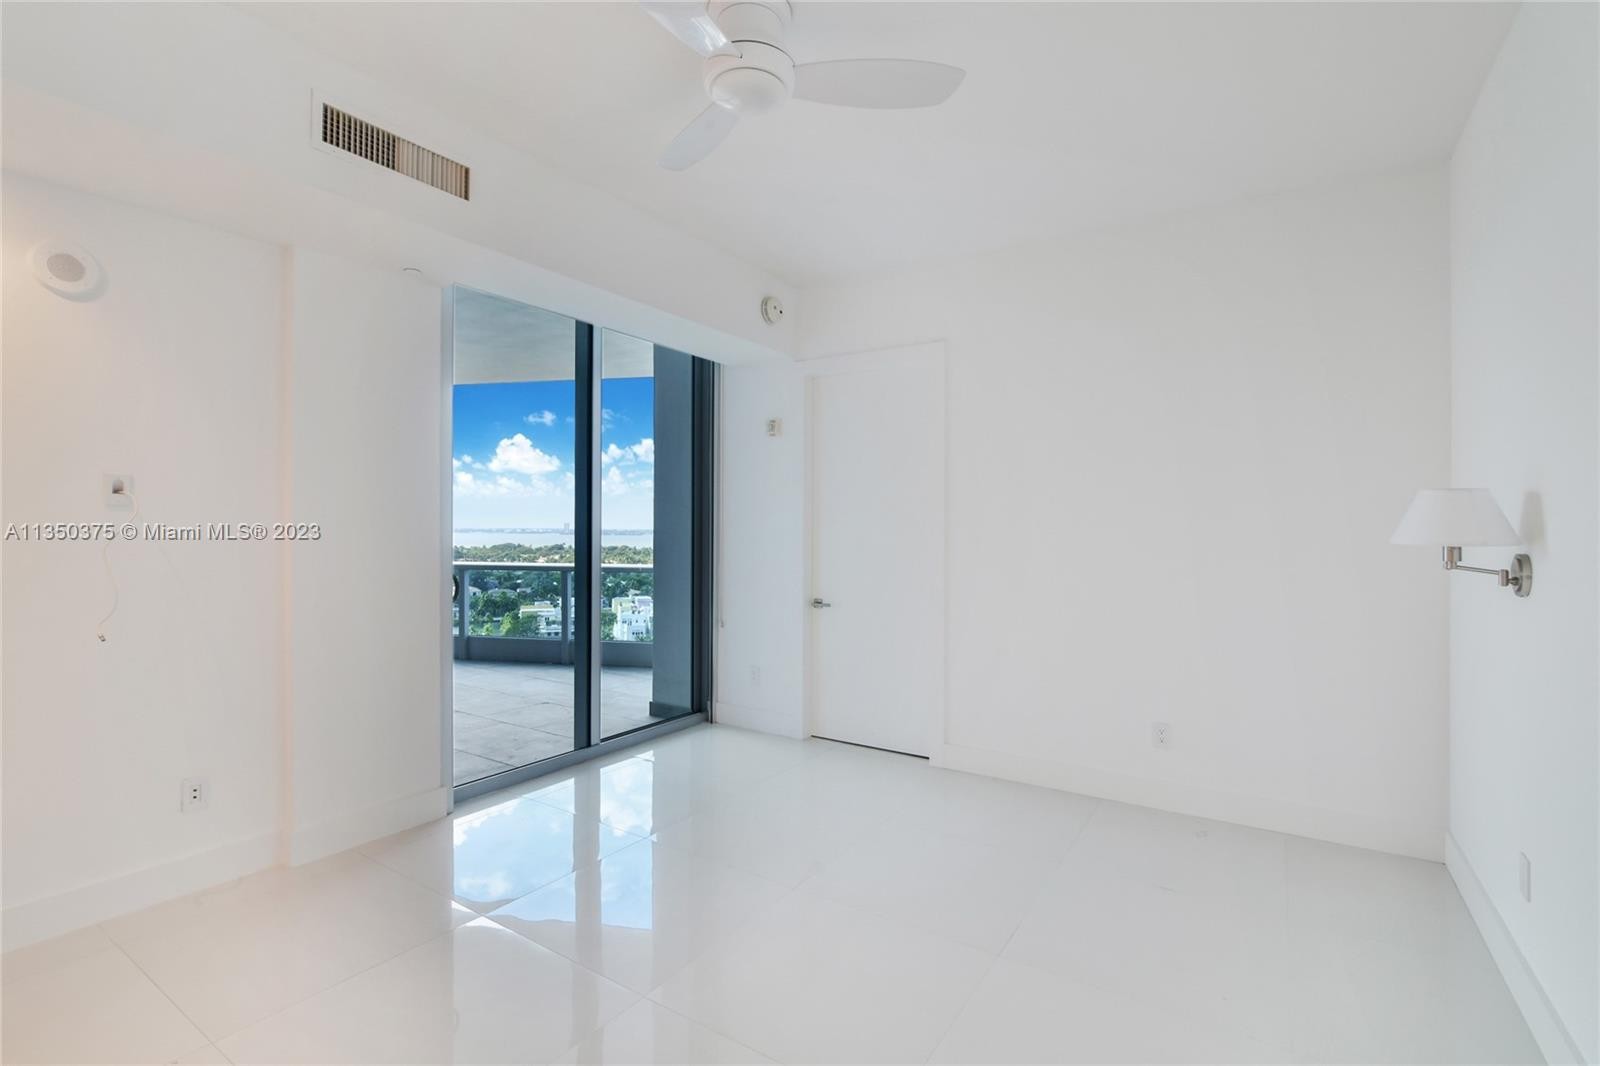 11. 5959 Collins Ave